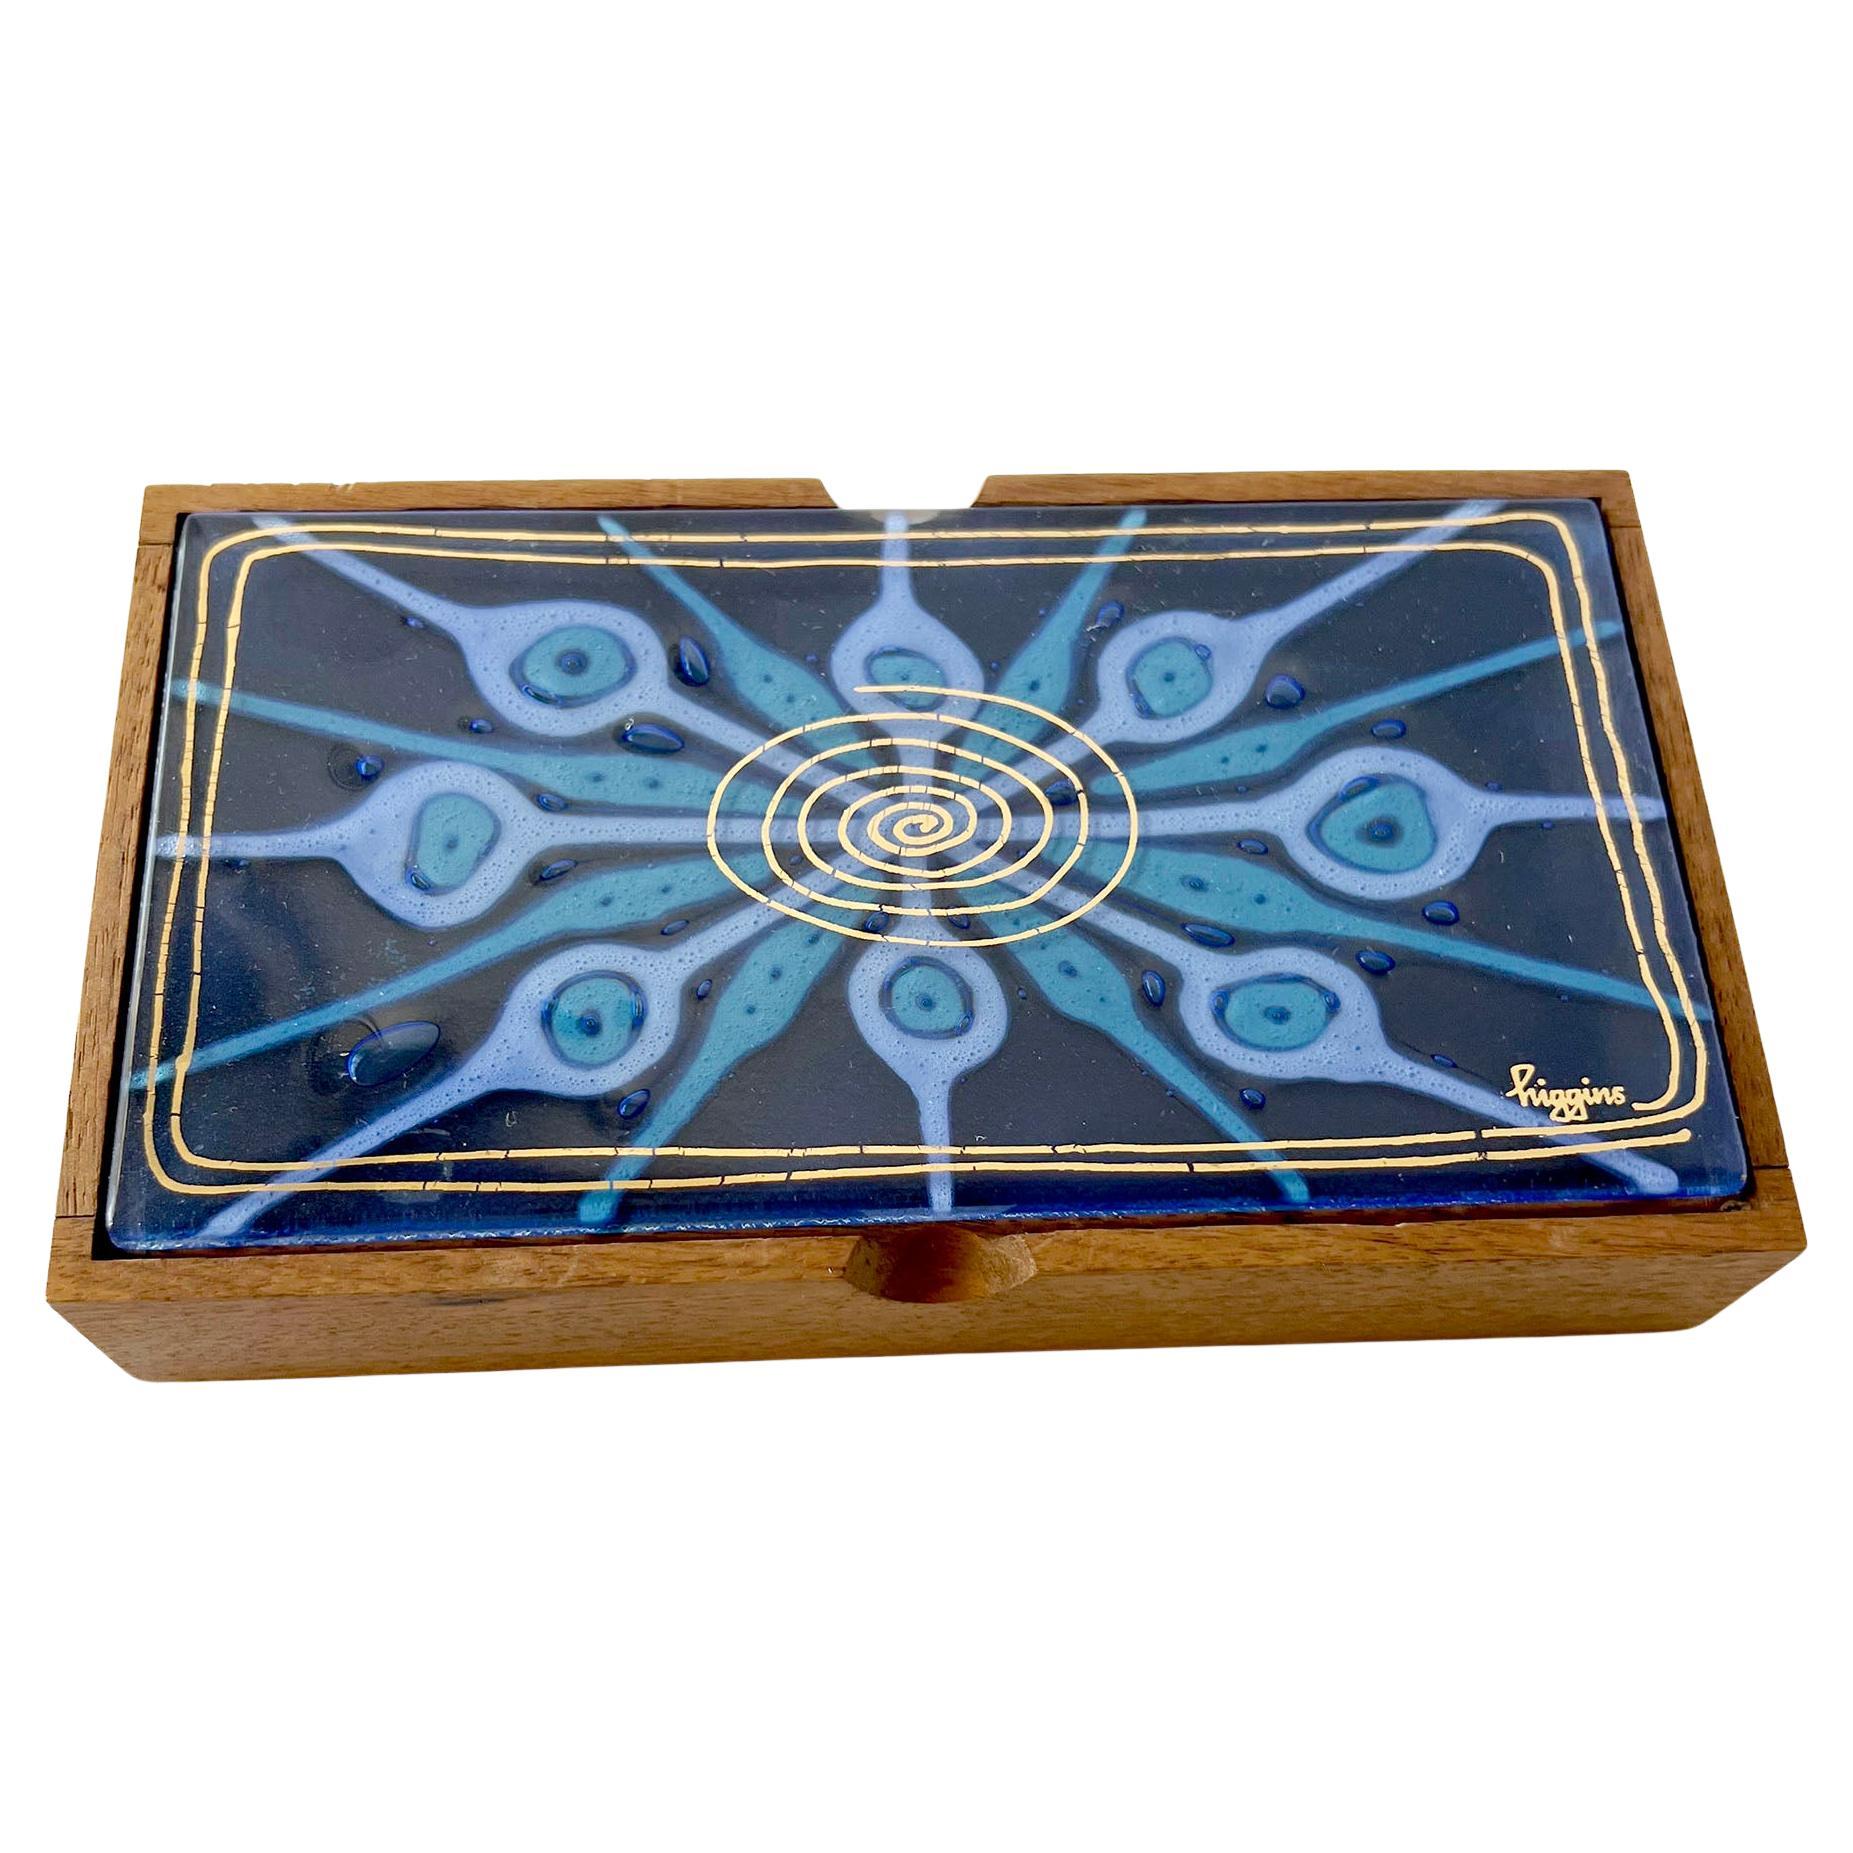 Frances and Michael Higgins American Modernist Glass and Wood Decorative Box For Sale